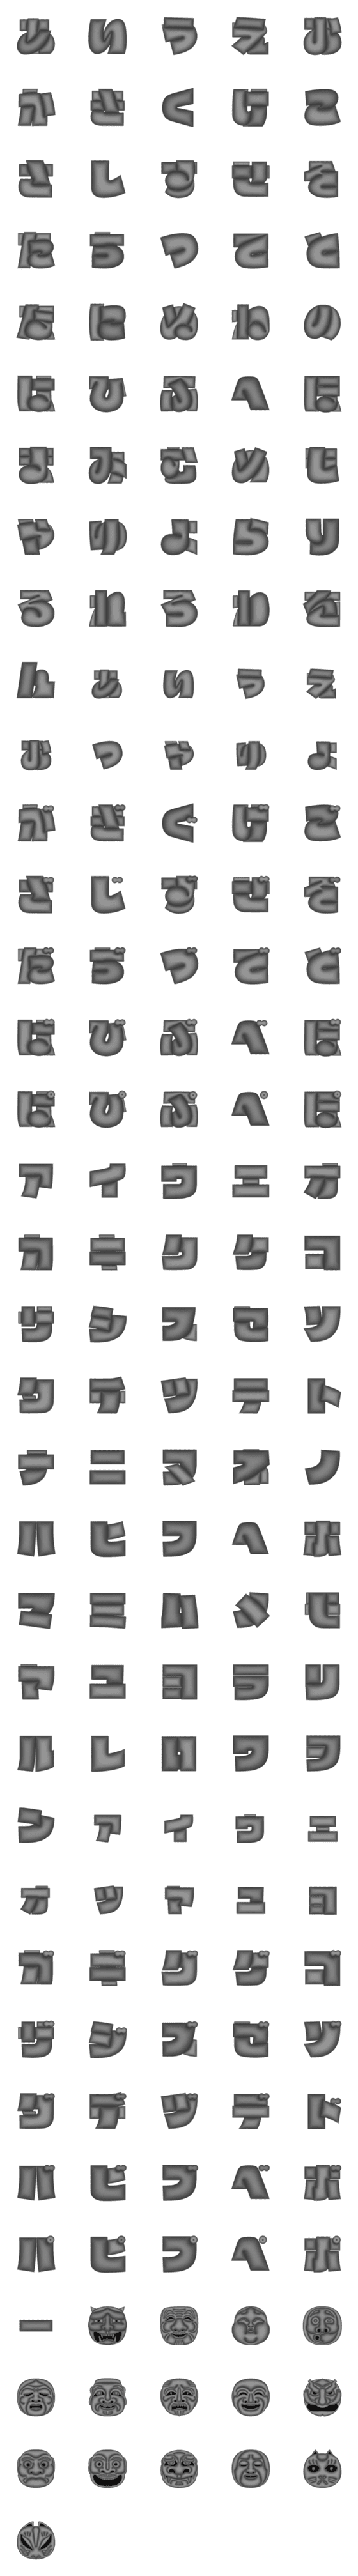 [LINE絵文字]ぷっくり文字with顔の画像一覧